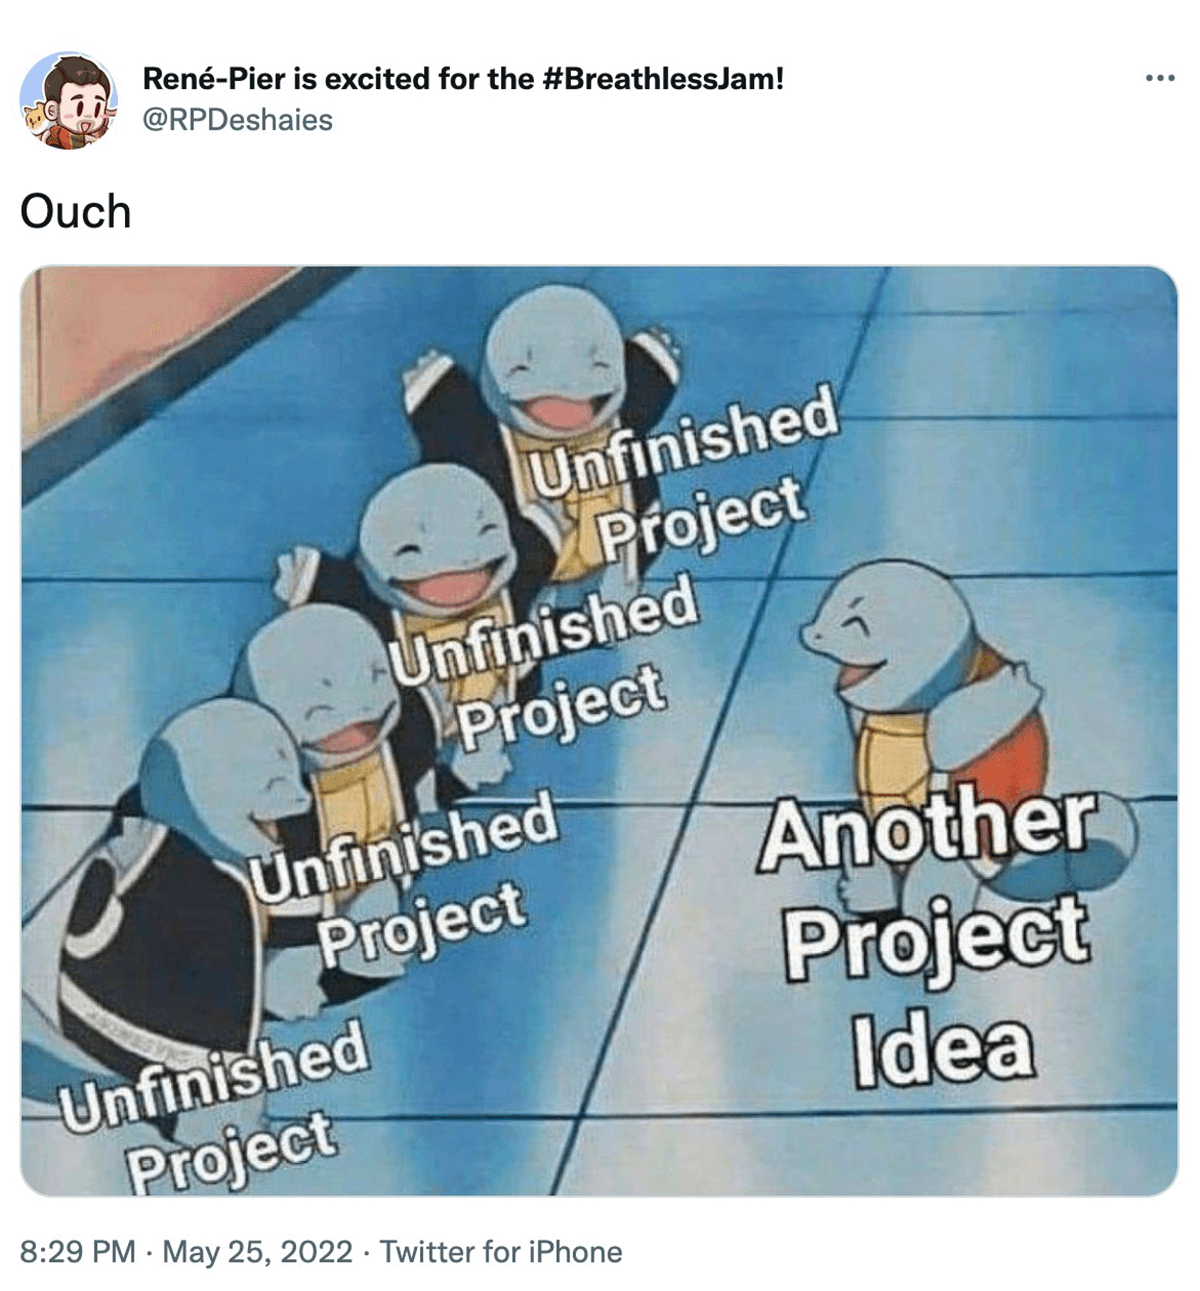 @RPDeshaies on twitter: Ouch. A bunch of unfinished projects being joined by another project idea.